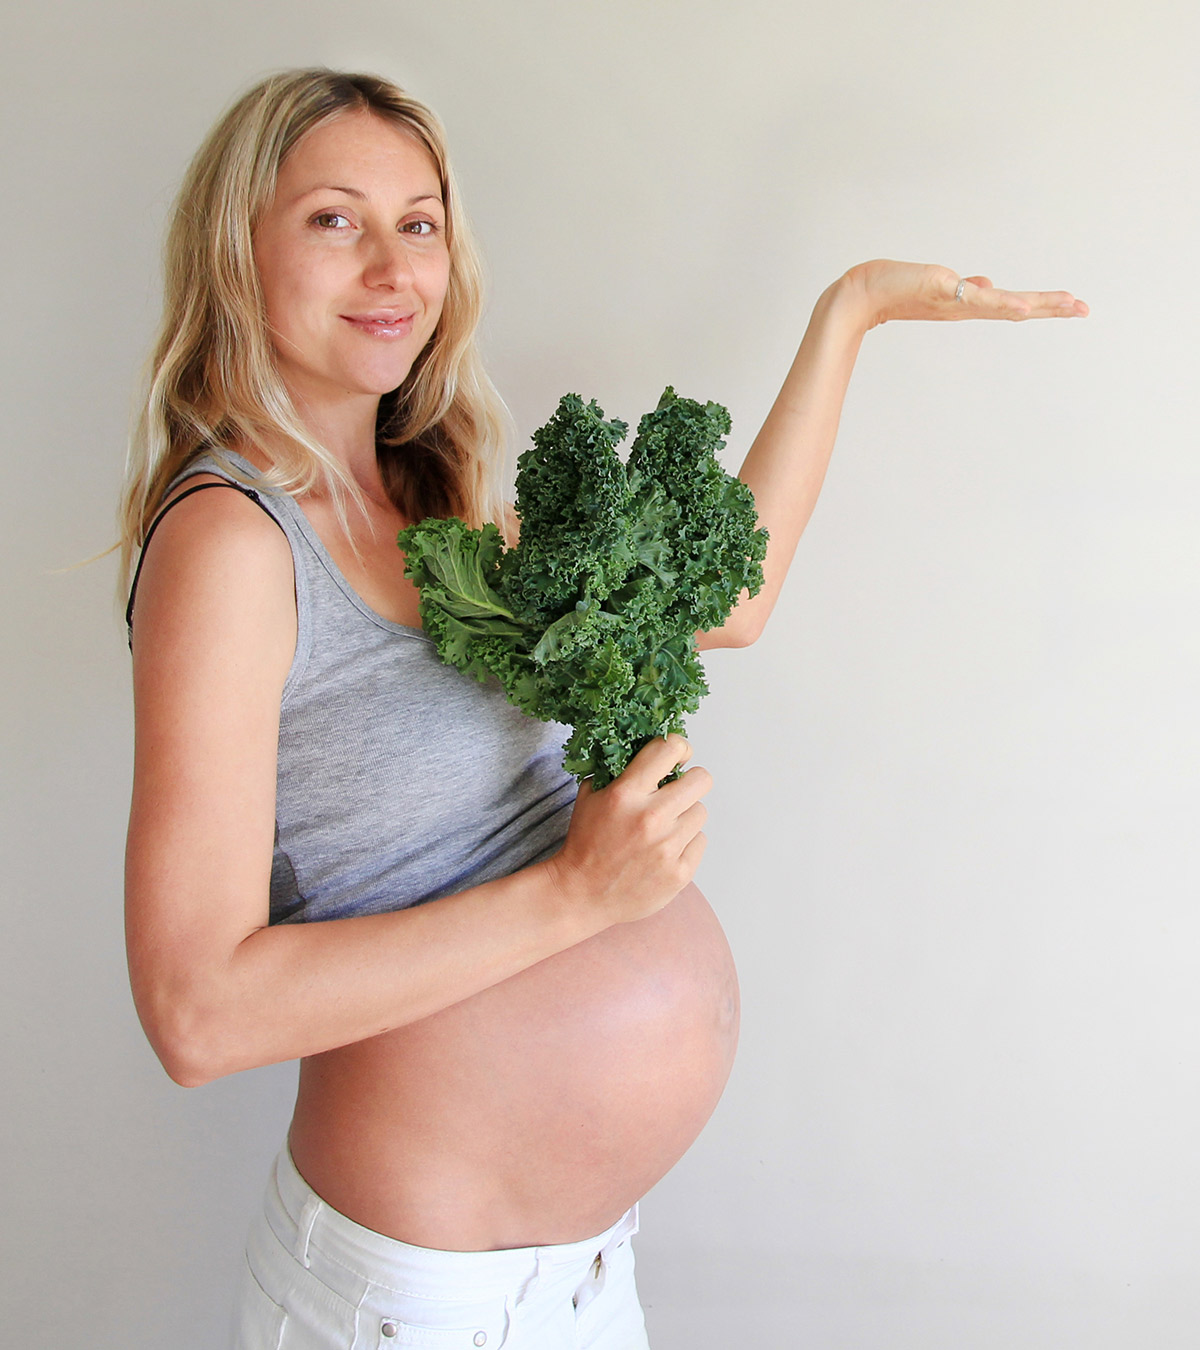 Iron During Pregnancy: How Much Do You Need?